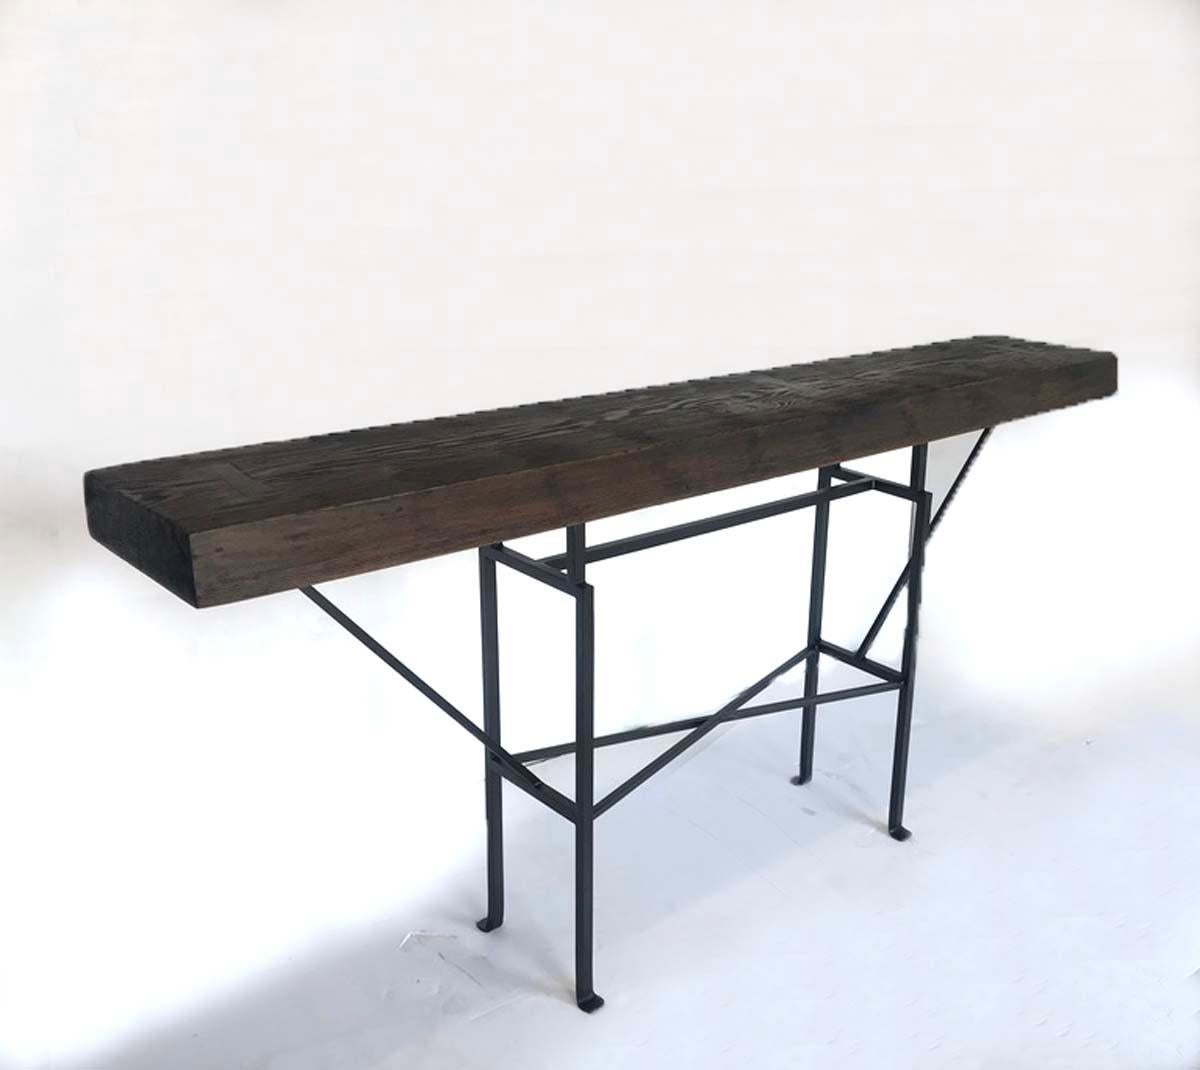 Custom buttress console with a  Douglas fir top and custom iron base. Can be made in any size and in a variety of finishes. Please see photo.
Made in Los Angeles by Dos Gallos Studio.
DUE TO CHANGING PRICES OF WOOD AND LABOR, CUSTOM PRICES ARE